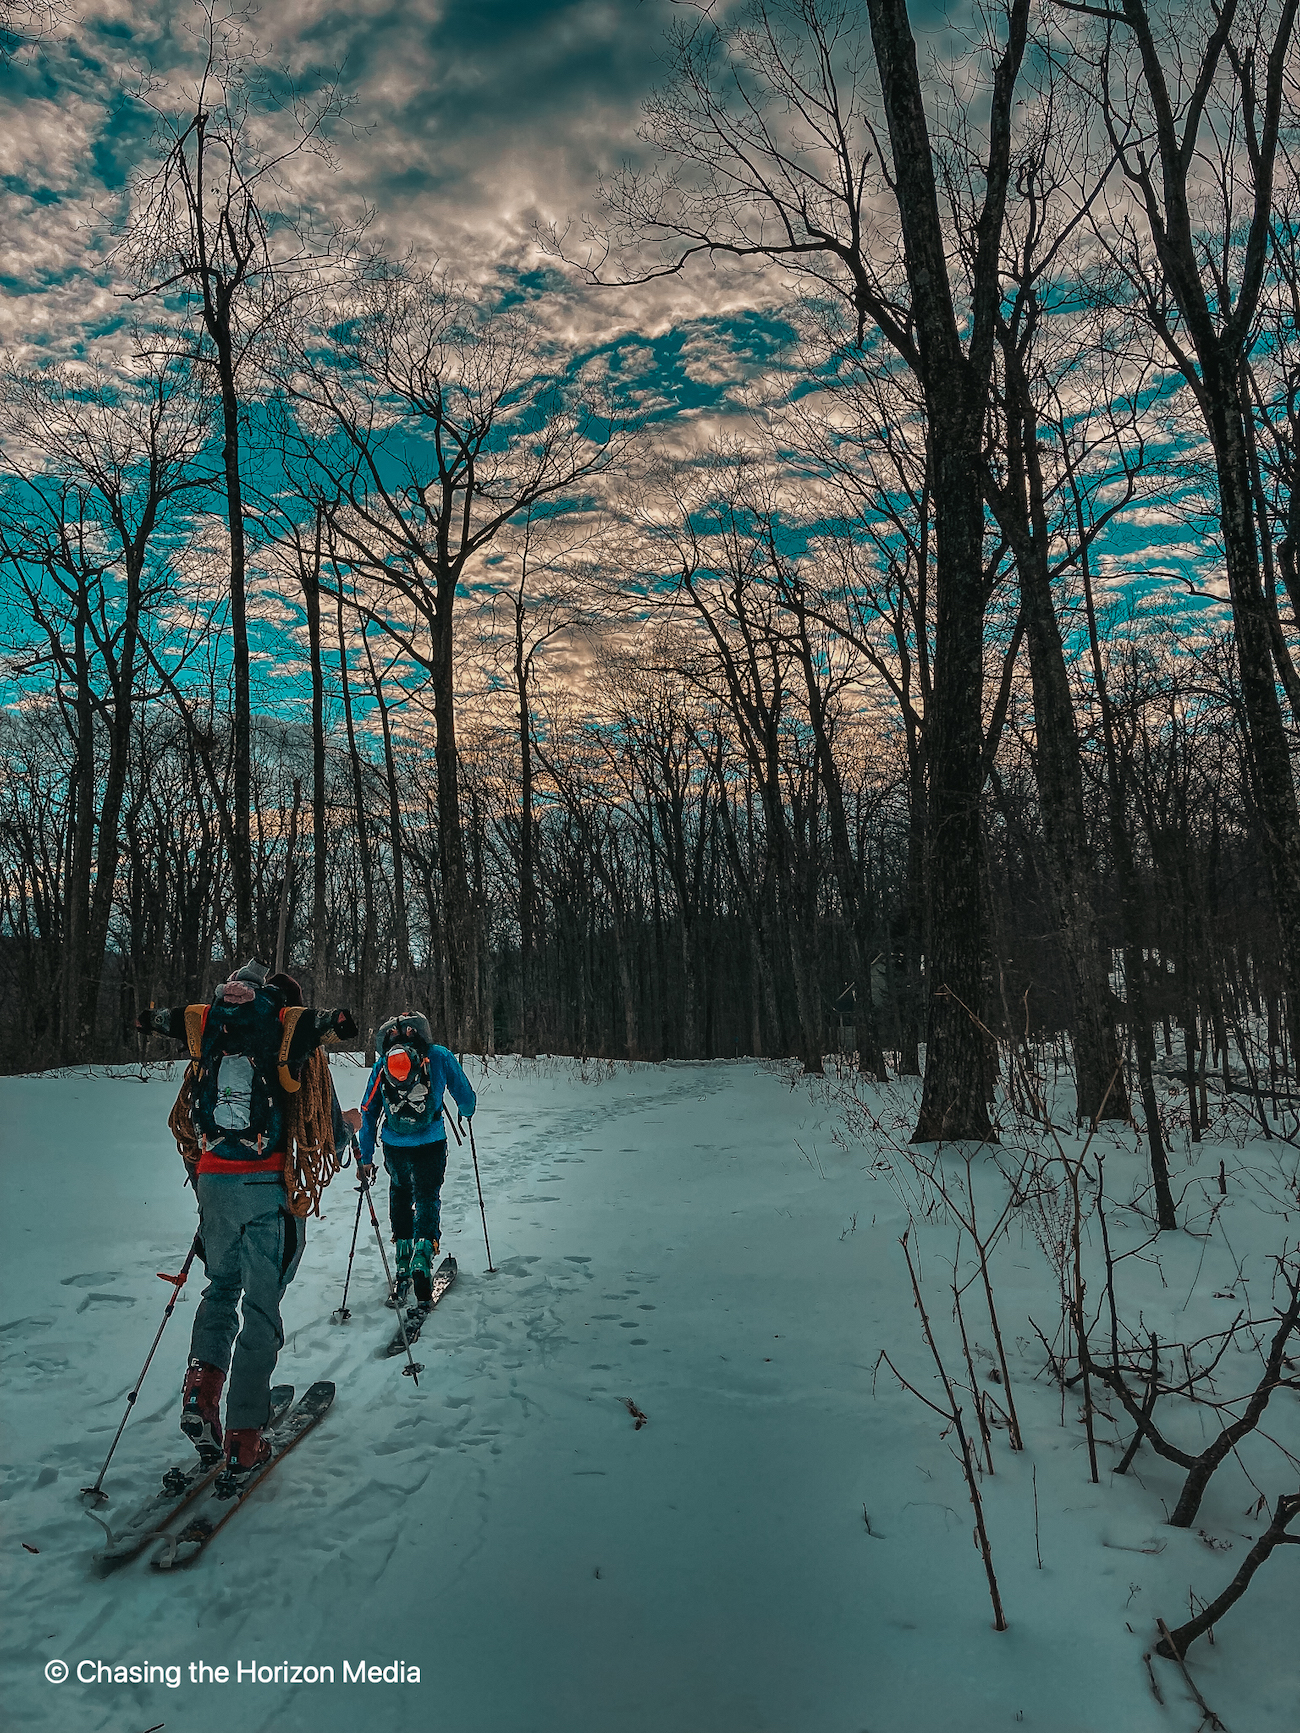 two skiers face away from the camera, traveling on a flat, snowy surface with bare trees ahead